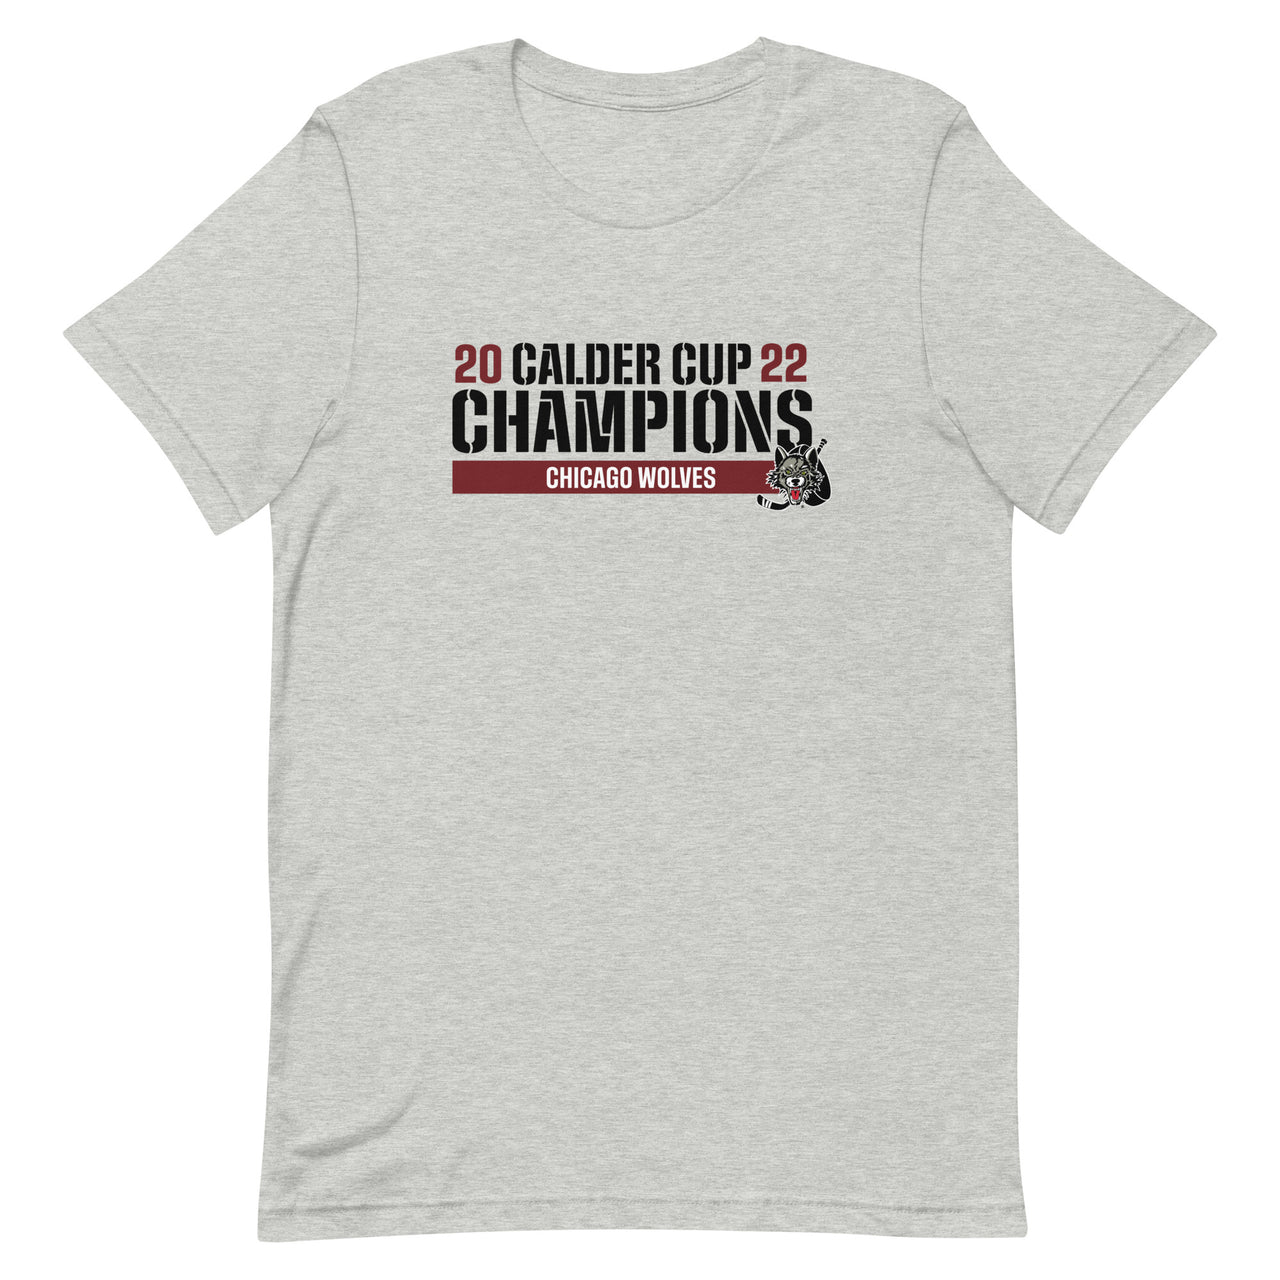 Chicago Wolves 2022 Calder Cup Champions Raise the Bar Adult Short Sleeve T-Shirt